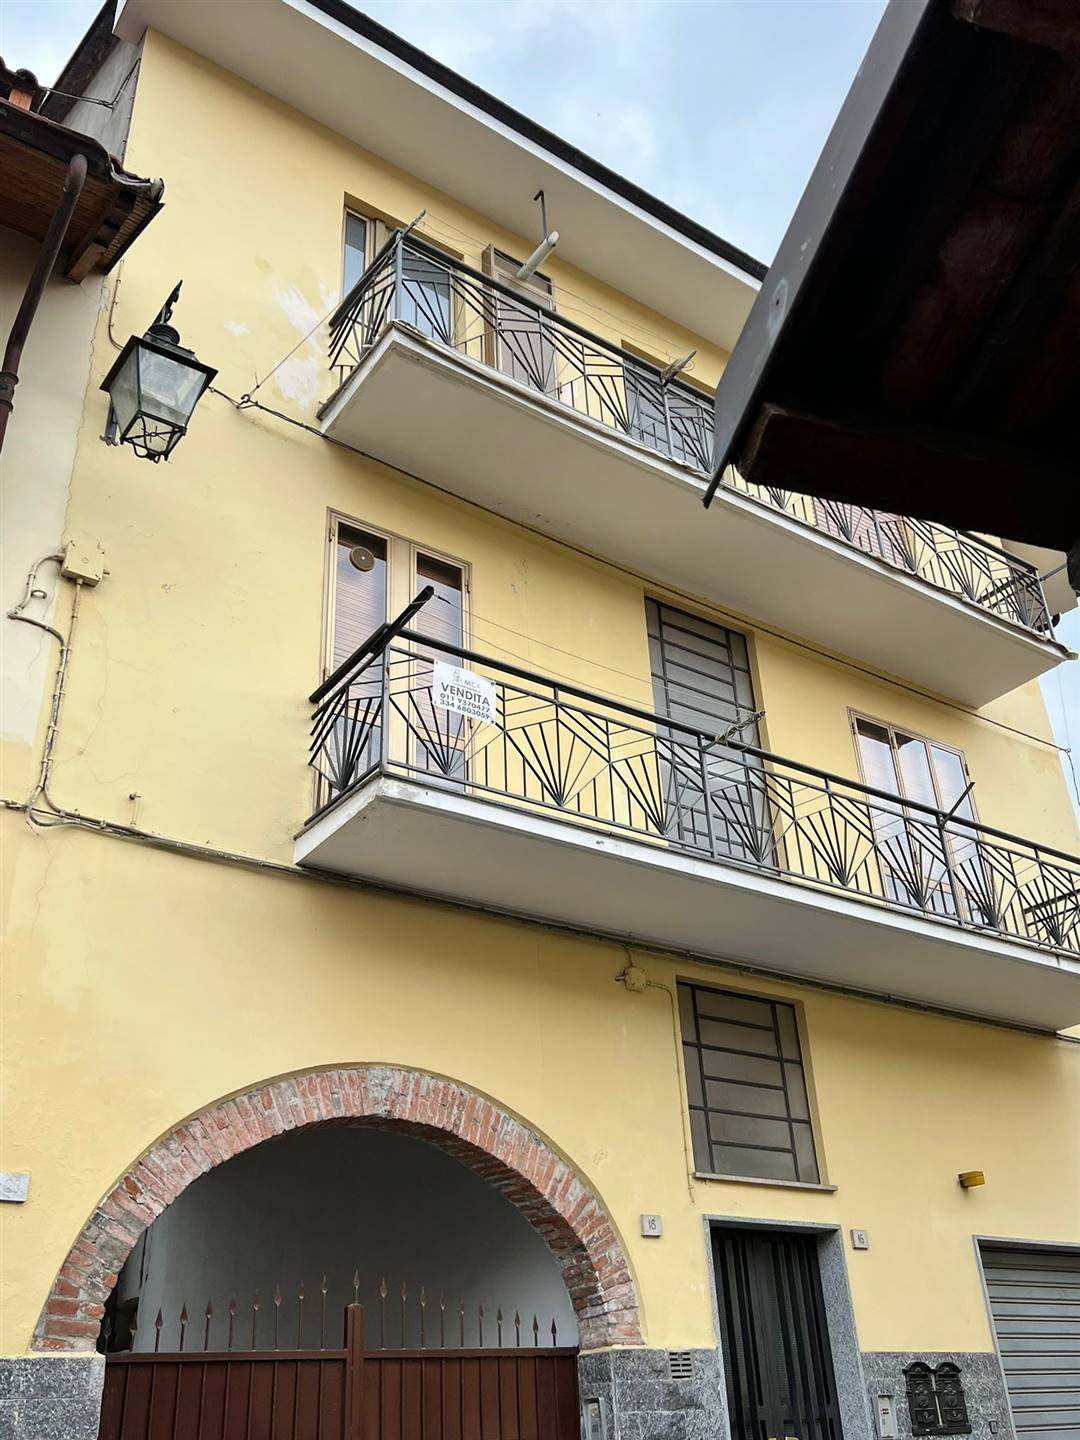 Detached house in GIAVENO 140 Sq. mt. | 8 Rooms - Garage